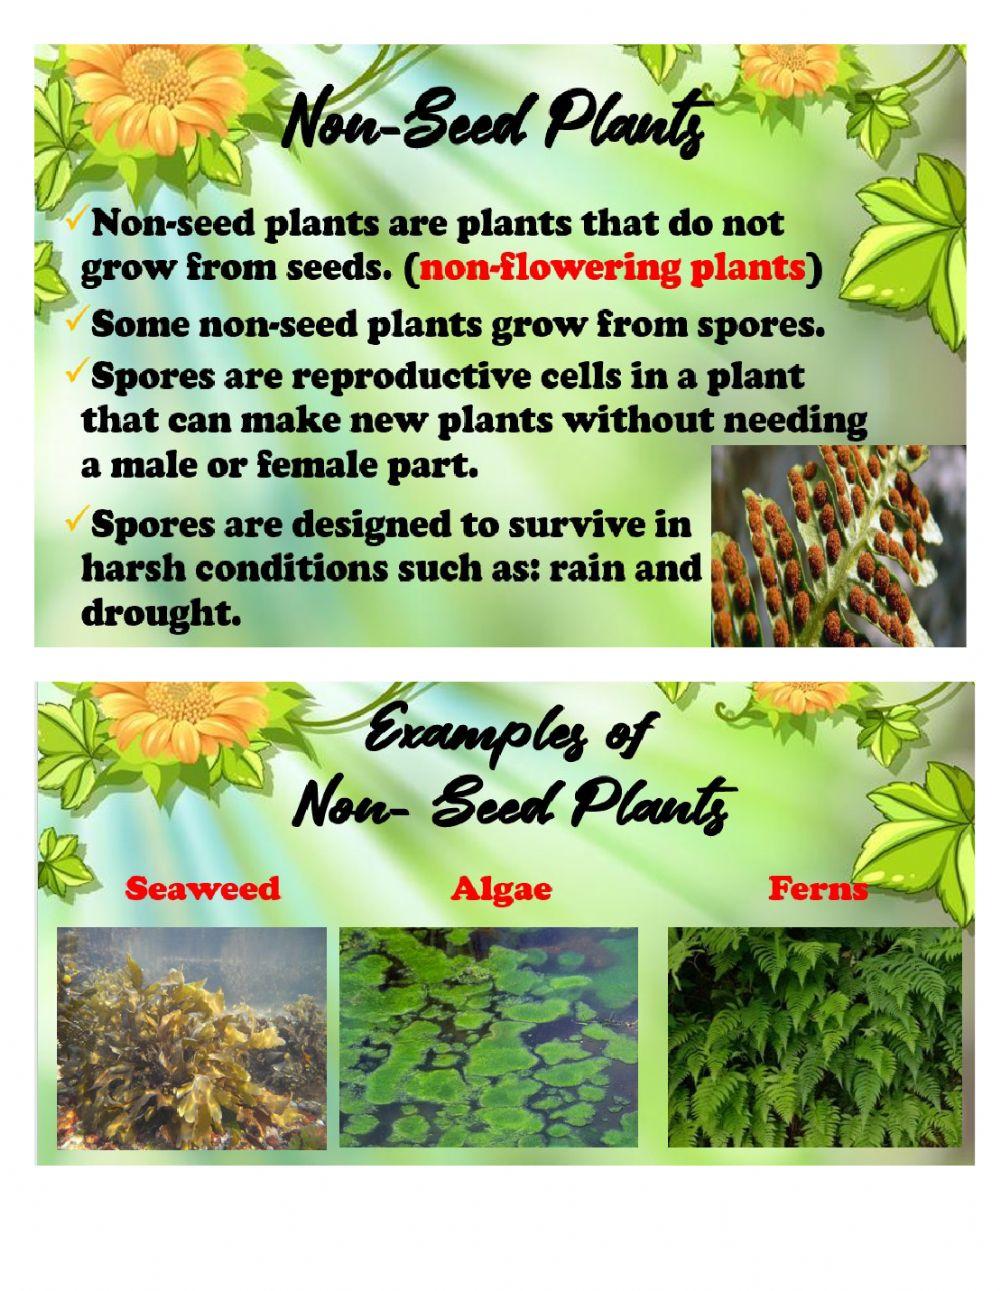 Seed and Non-Seed Plants